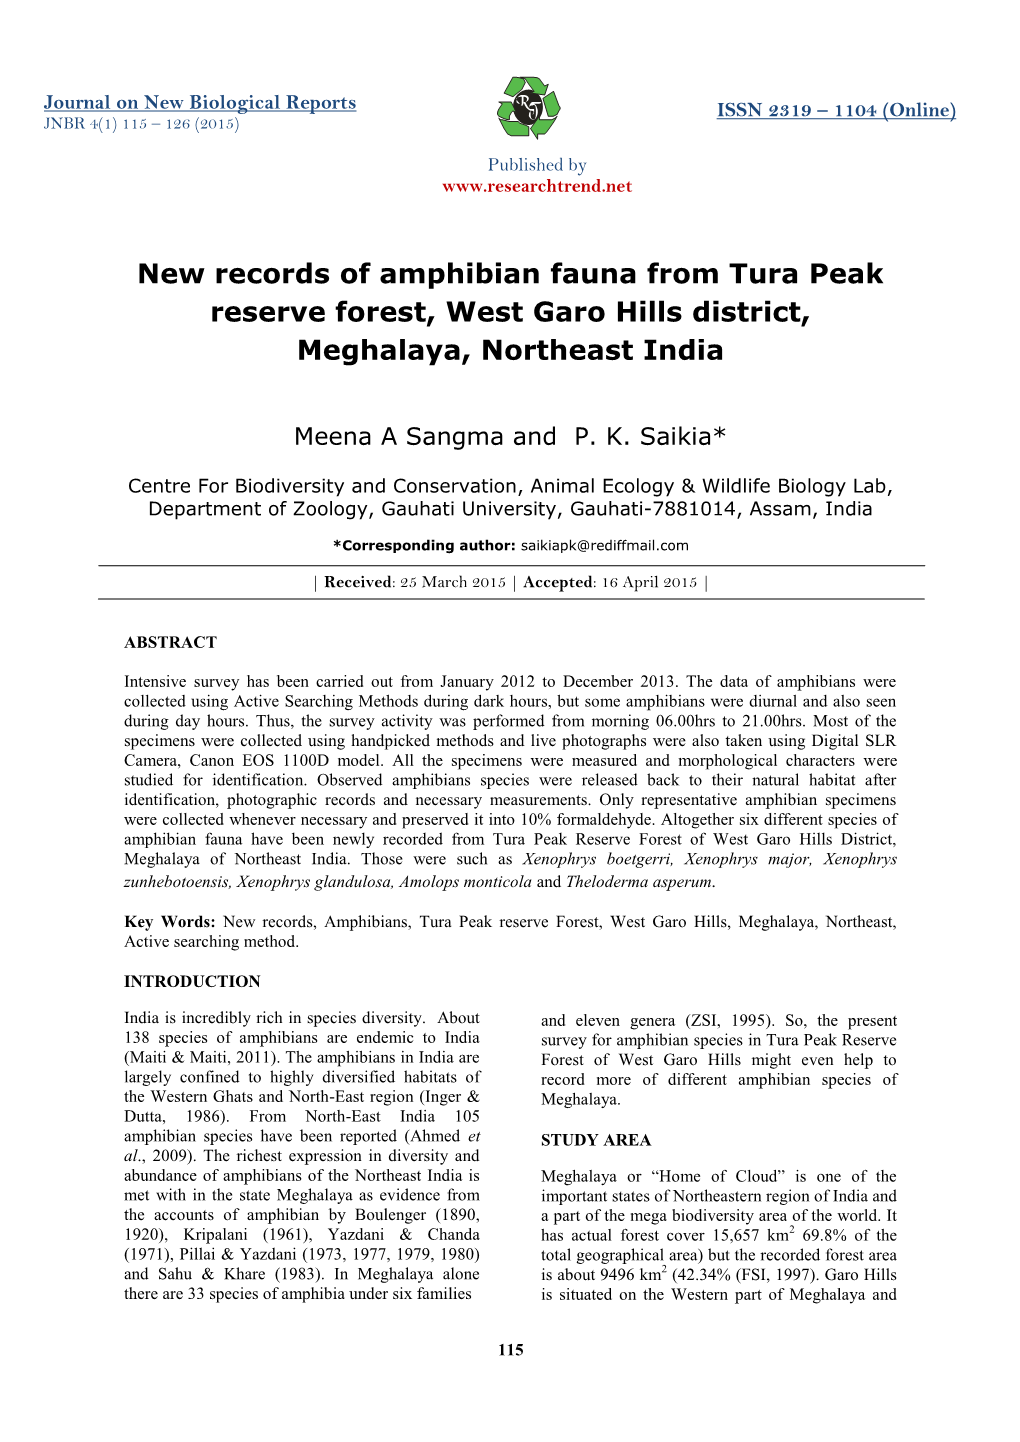 New Records of Amphibian Fauna from Tura Peak Reserve Forest, West Garo Hills District, Meghalaya, Northeast India